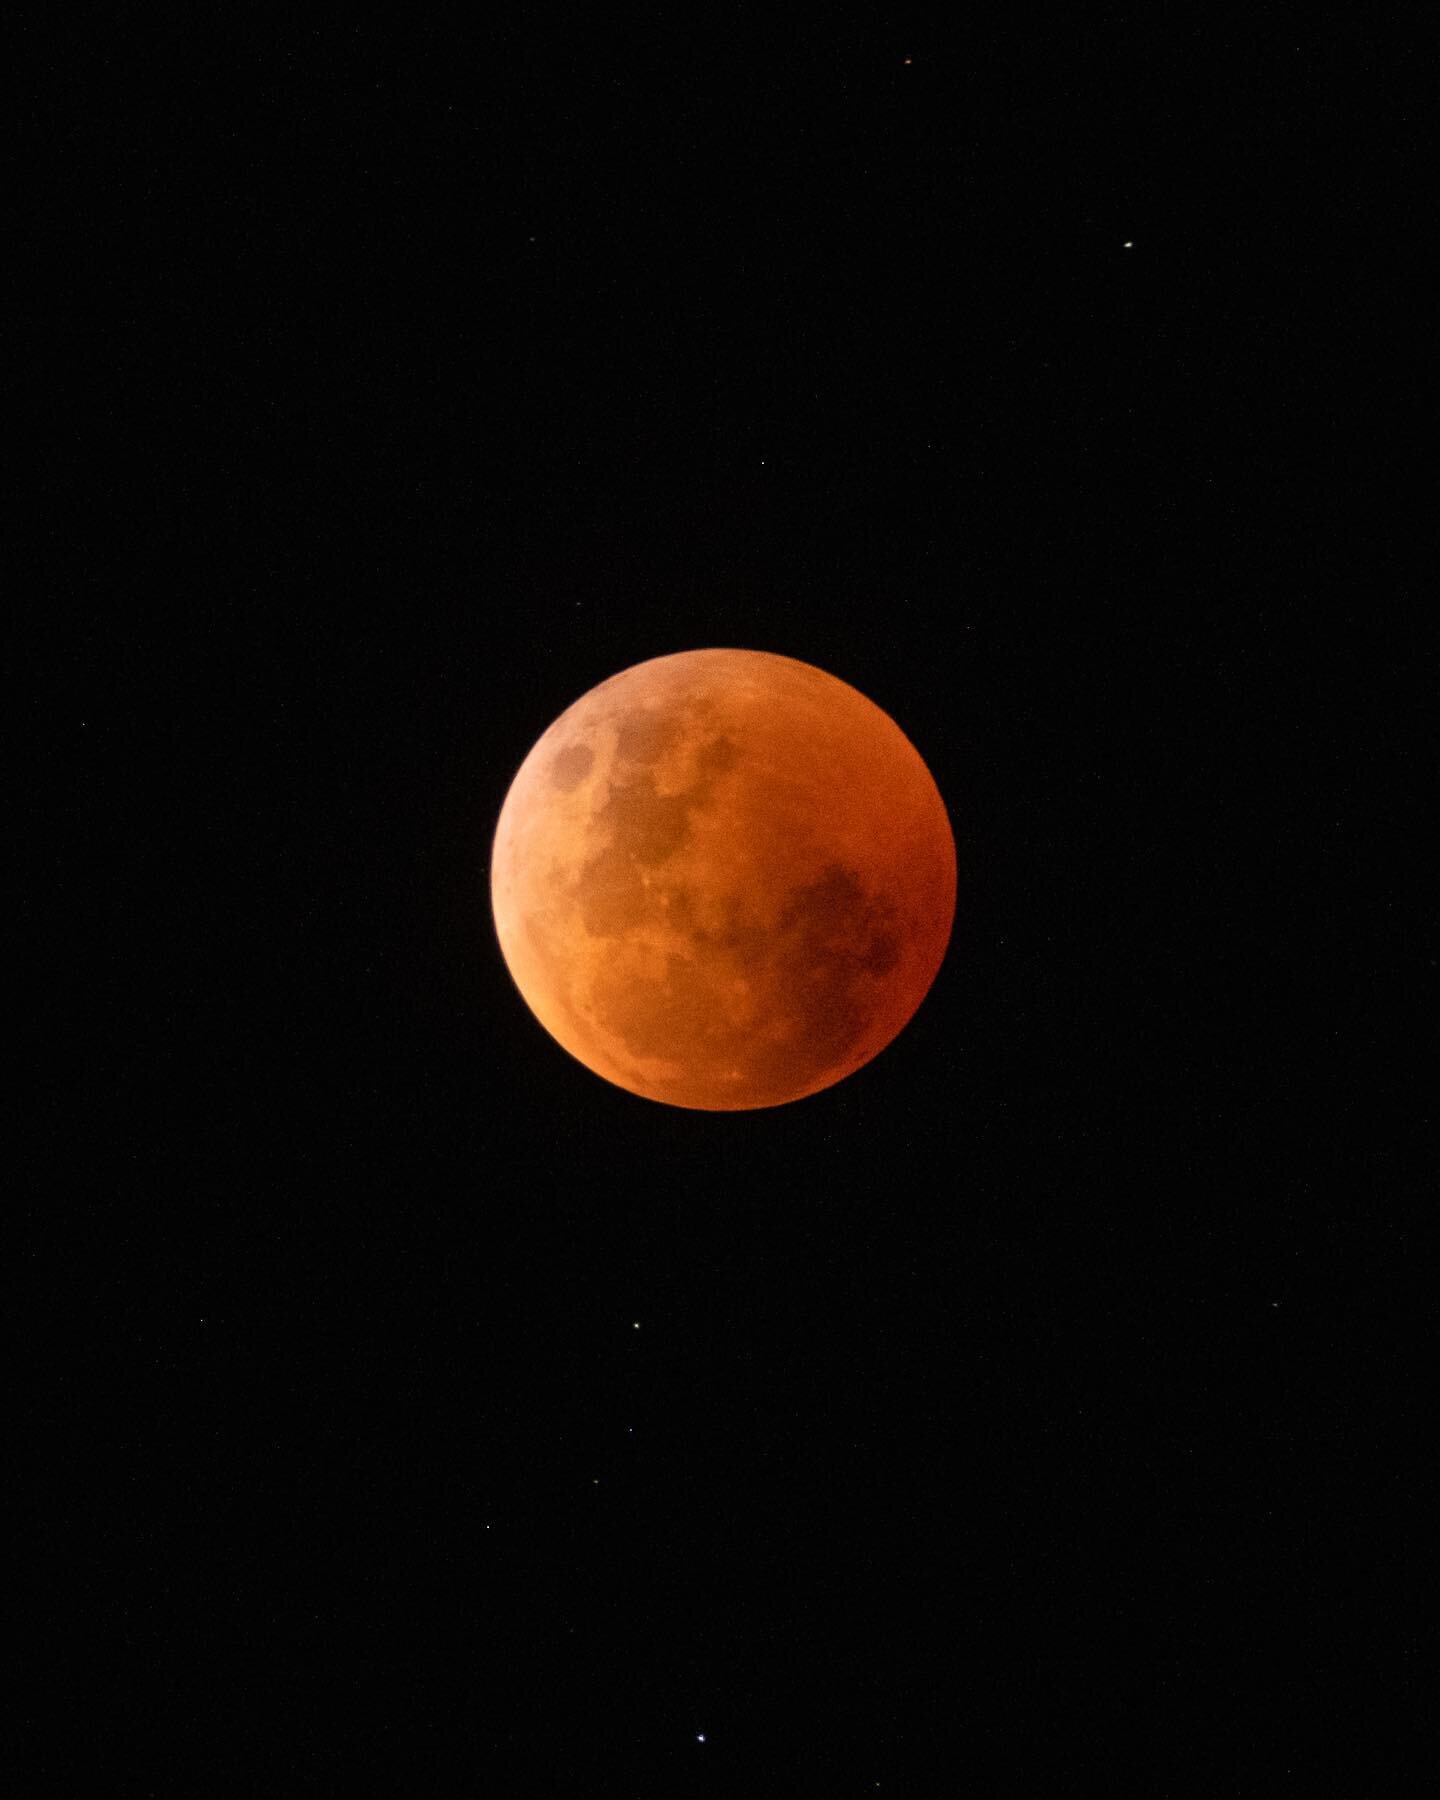 Yes, I&rsquo;m posting a shot of the lunar eclipse from a few nights ago. I don&rsquo;t tend to rush to edit images straight away as I once did. It&rsquo;s a very fast passed game here on the socials and I&rsquo;ve learnt to not fall into rushing to 